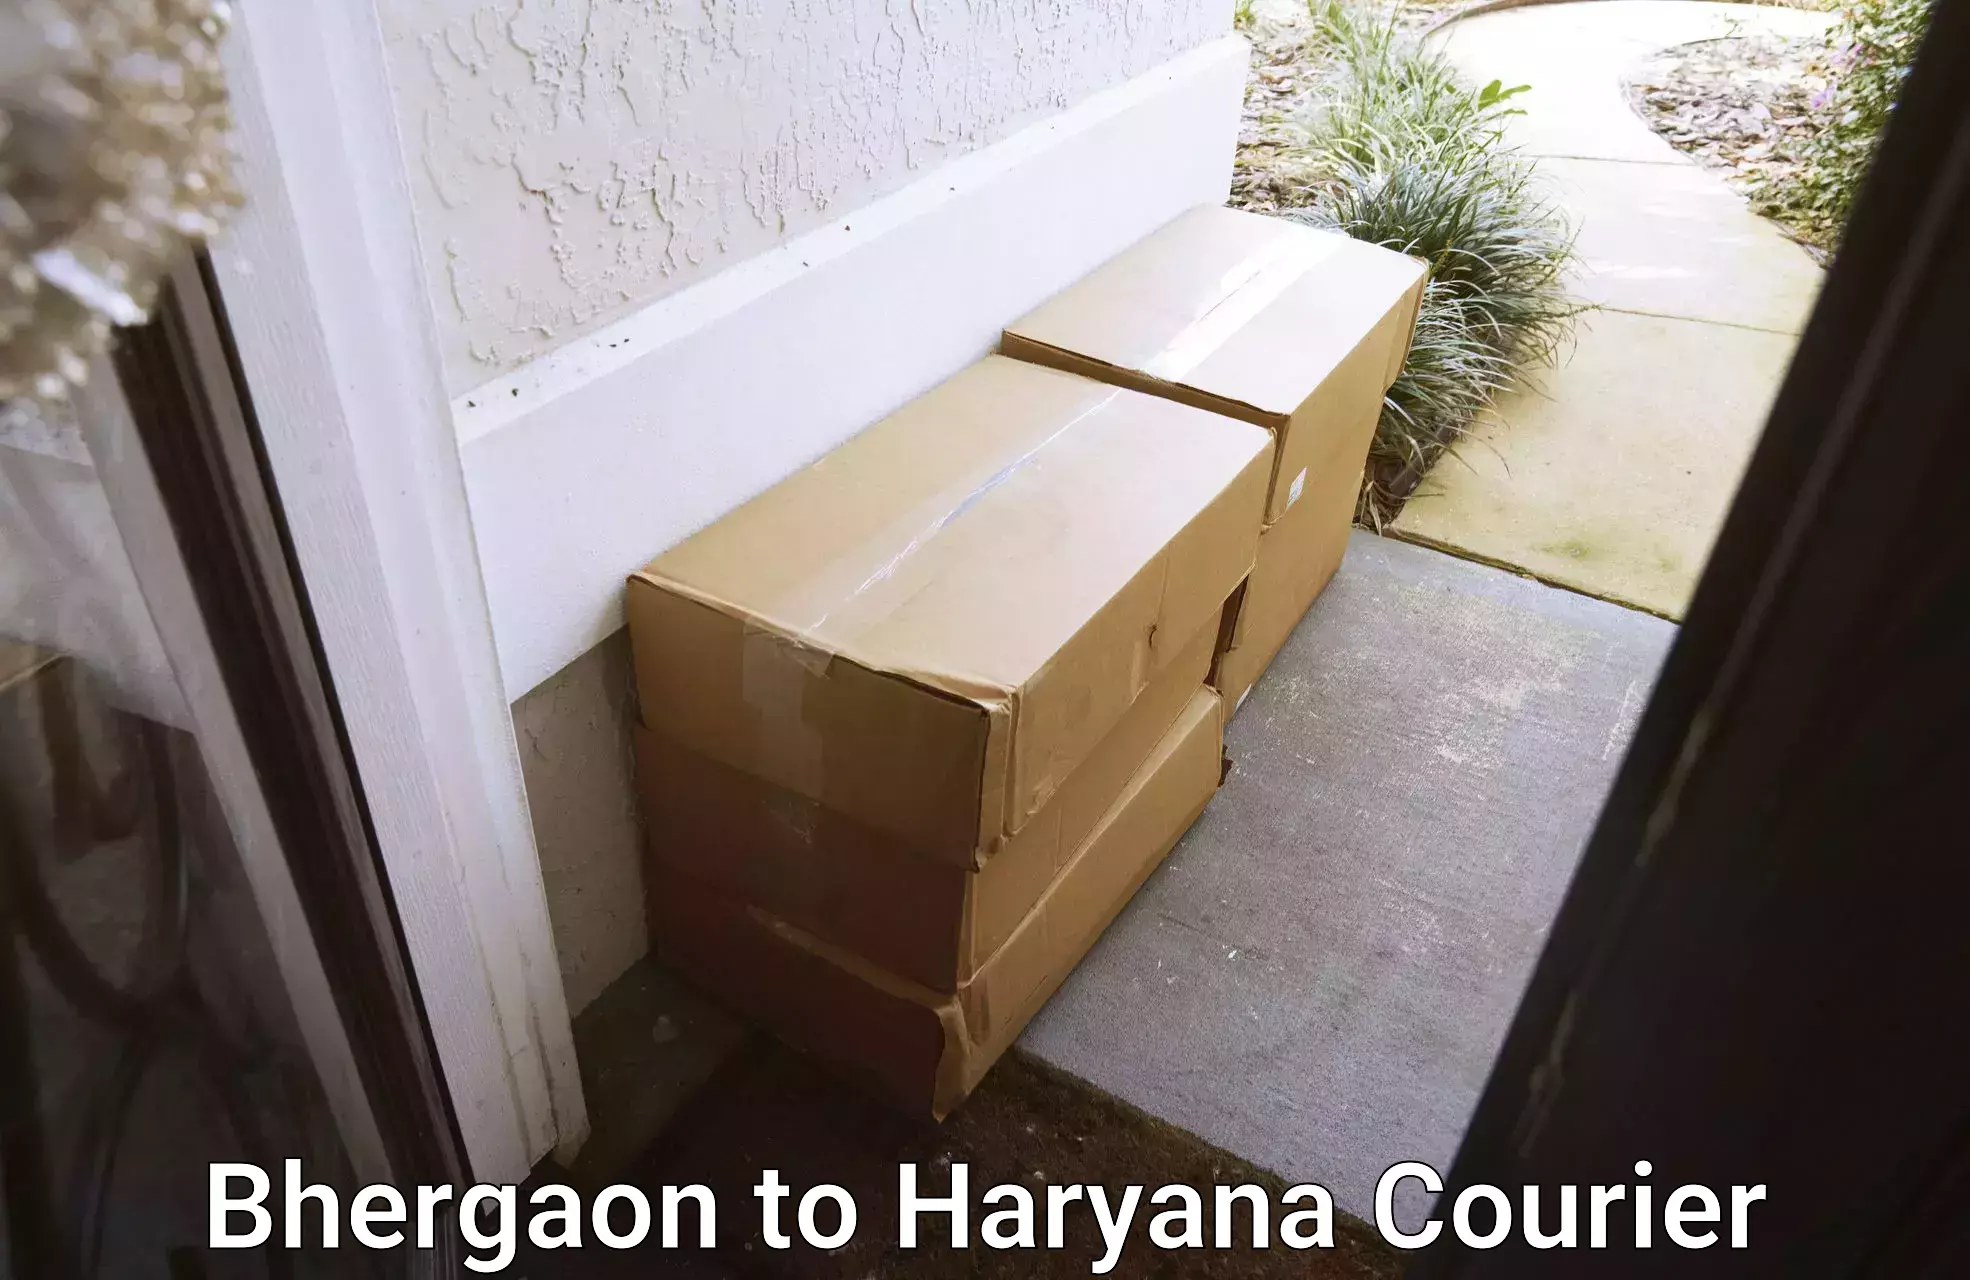 Cost-effective courier options in Bhergaon to Chaudhary Charan Singh Haryana Agricultural University Hisar